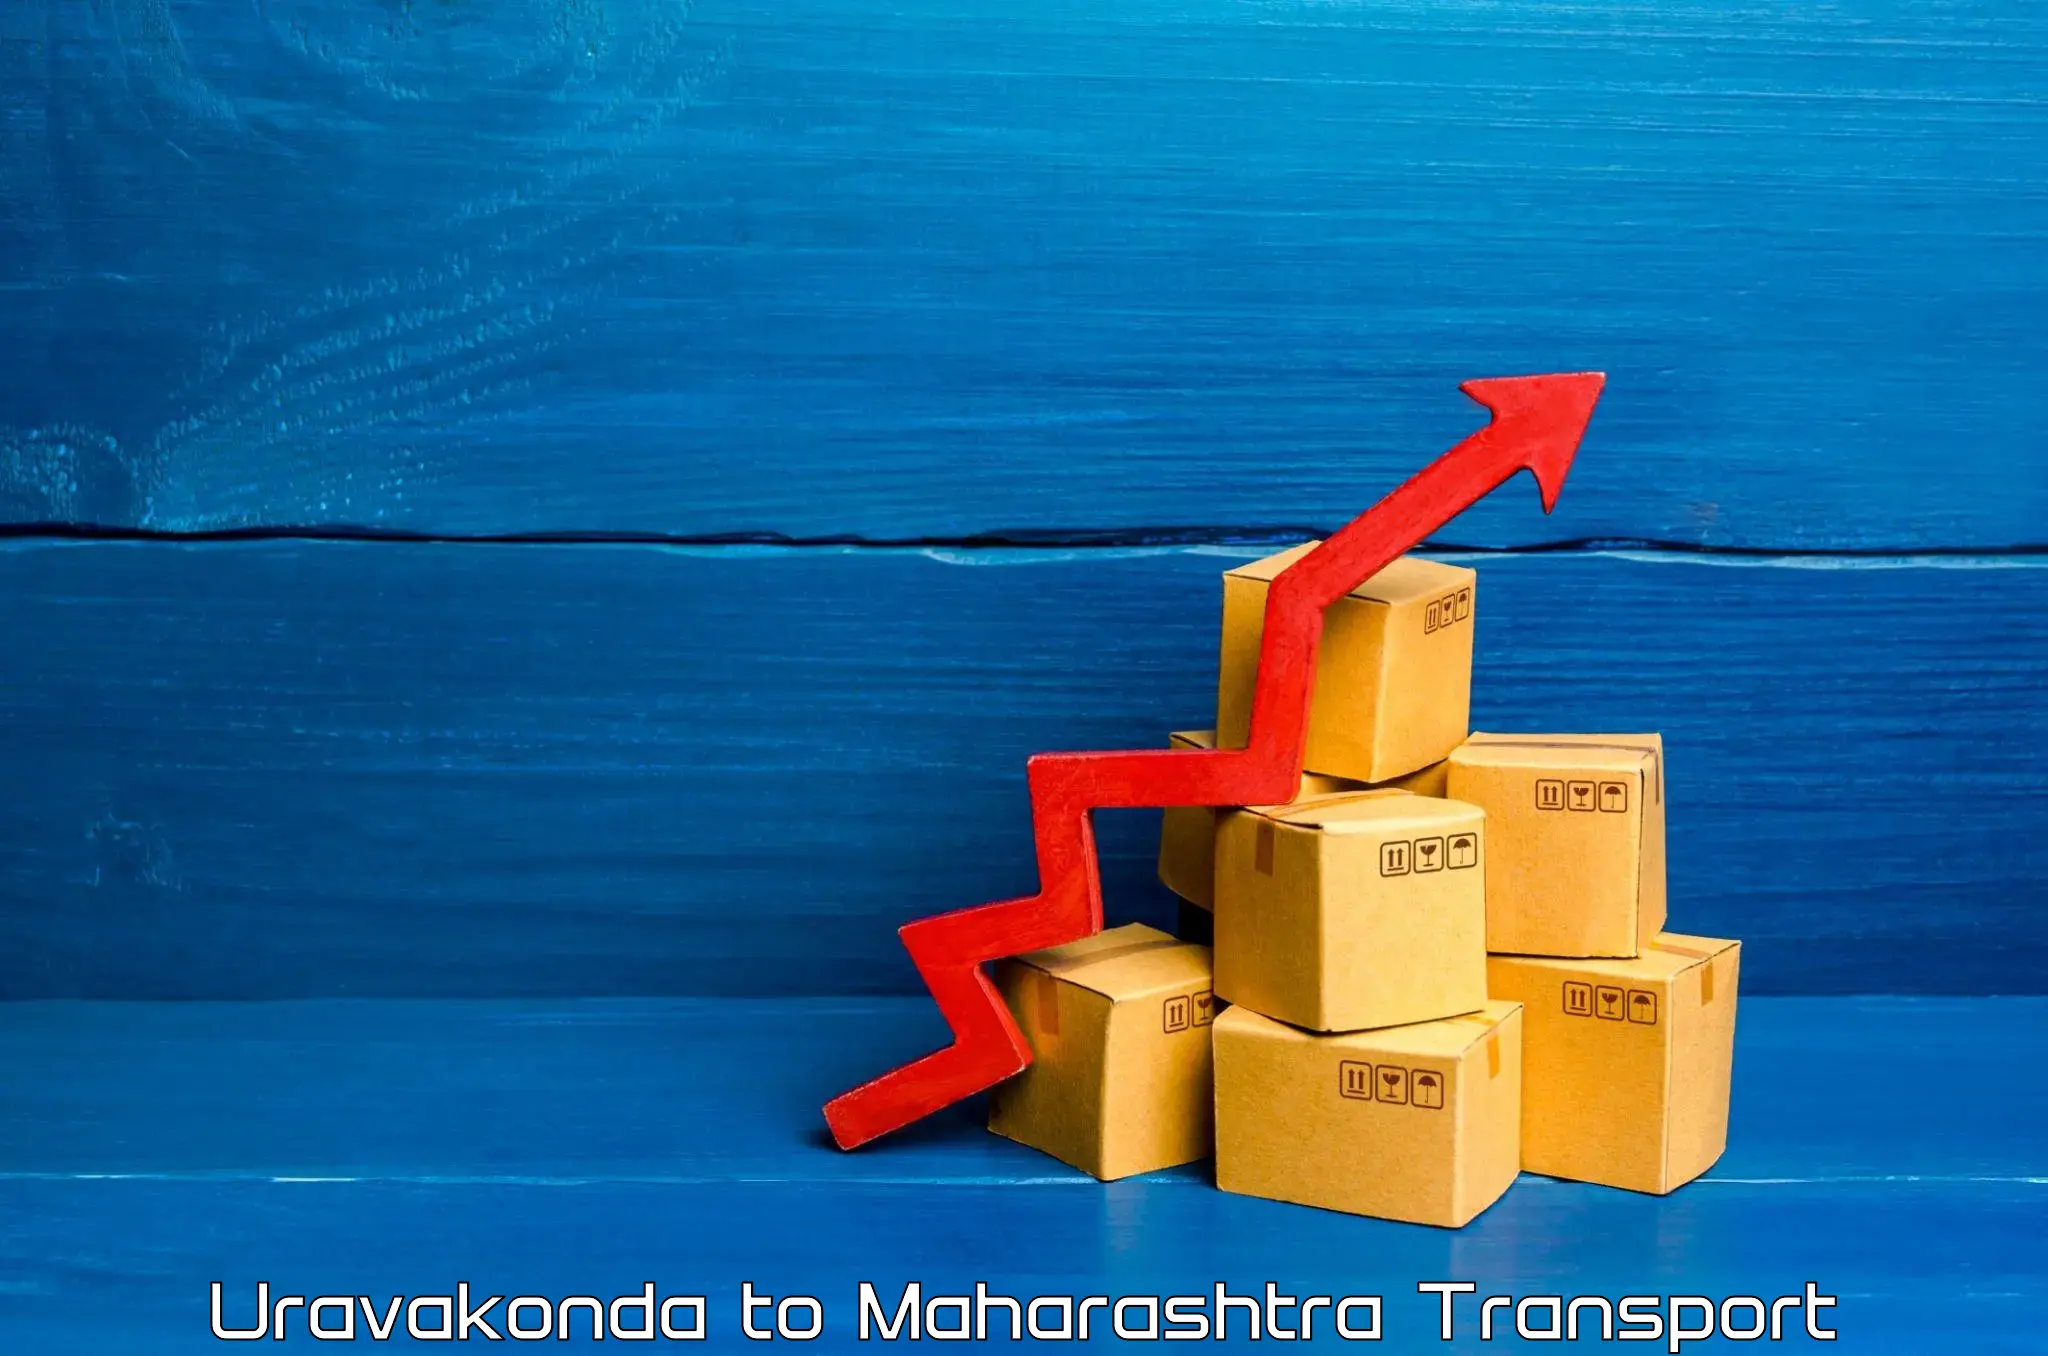 Transport bike from one state to another in Uravakonda to Maharashtra